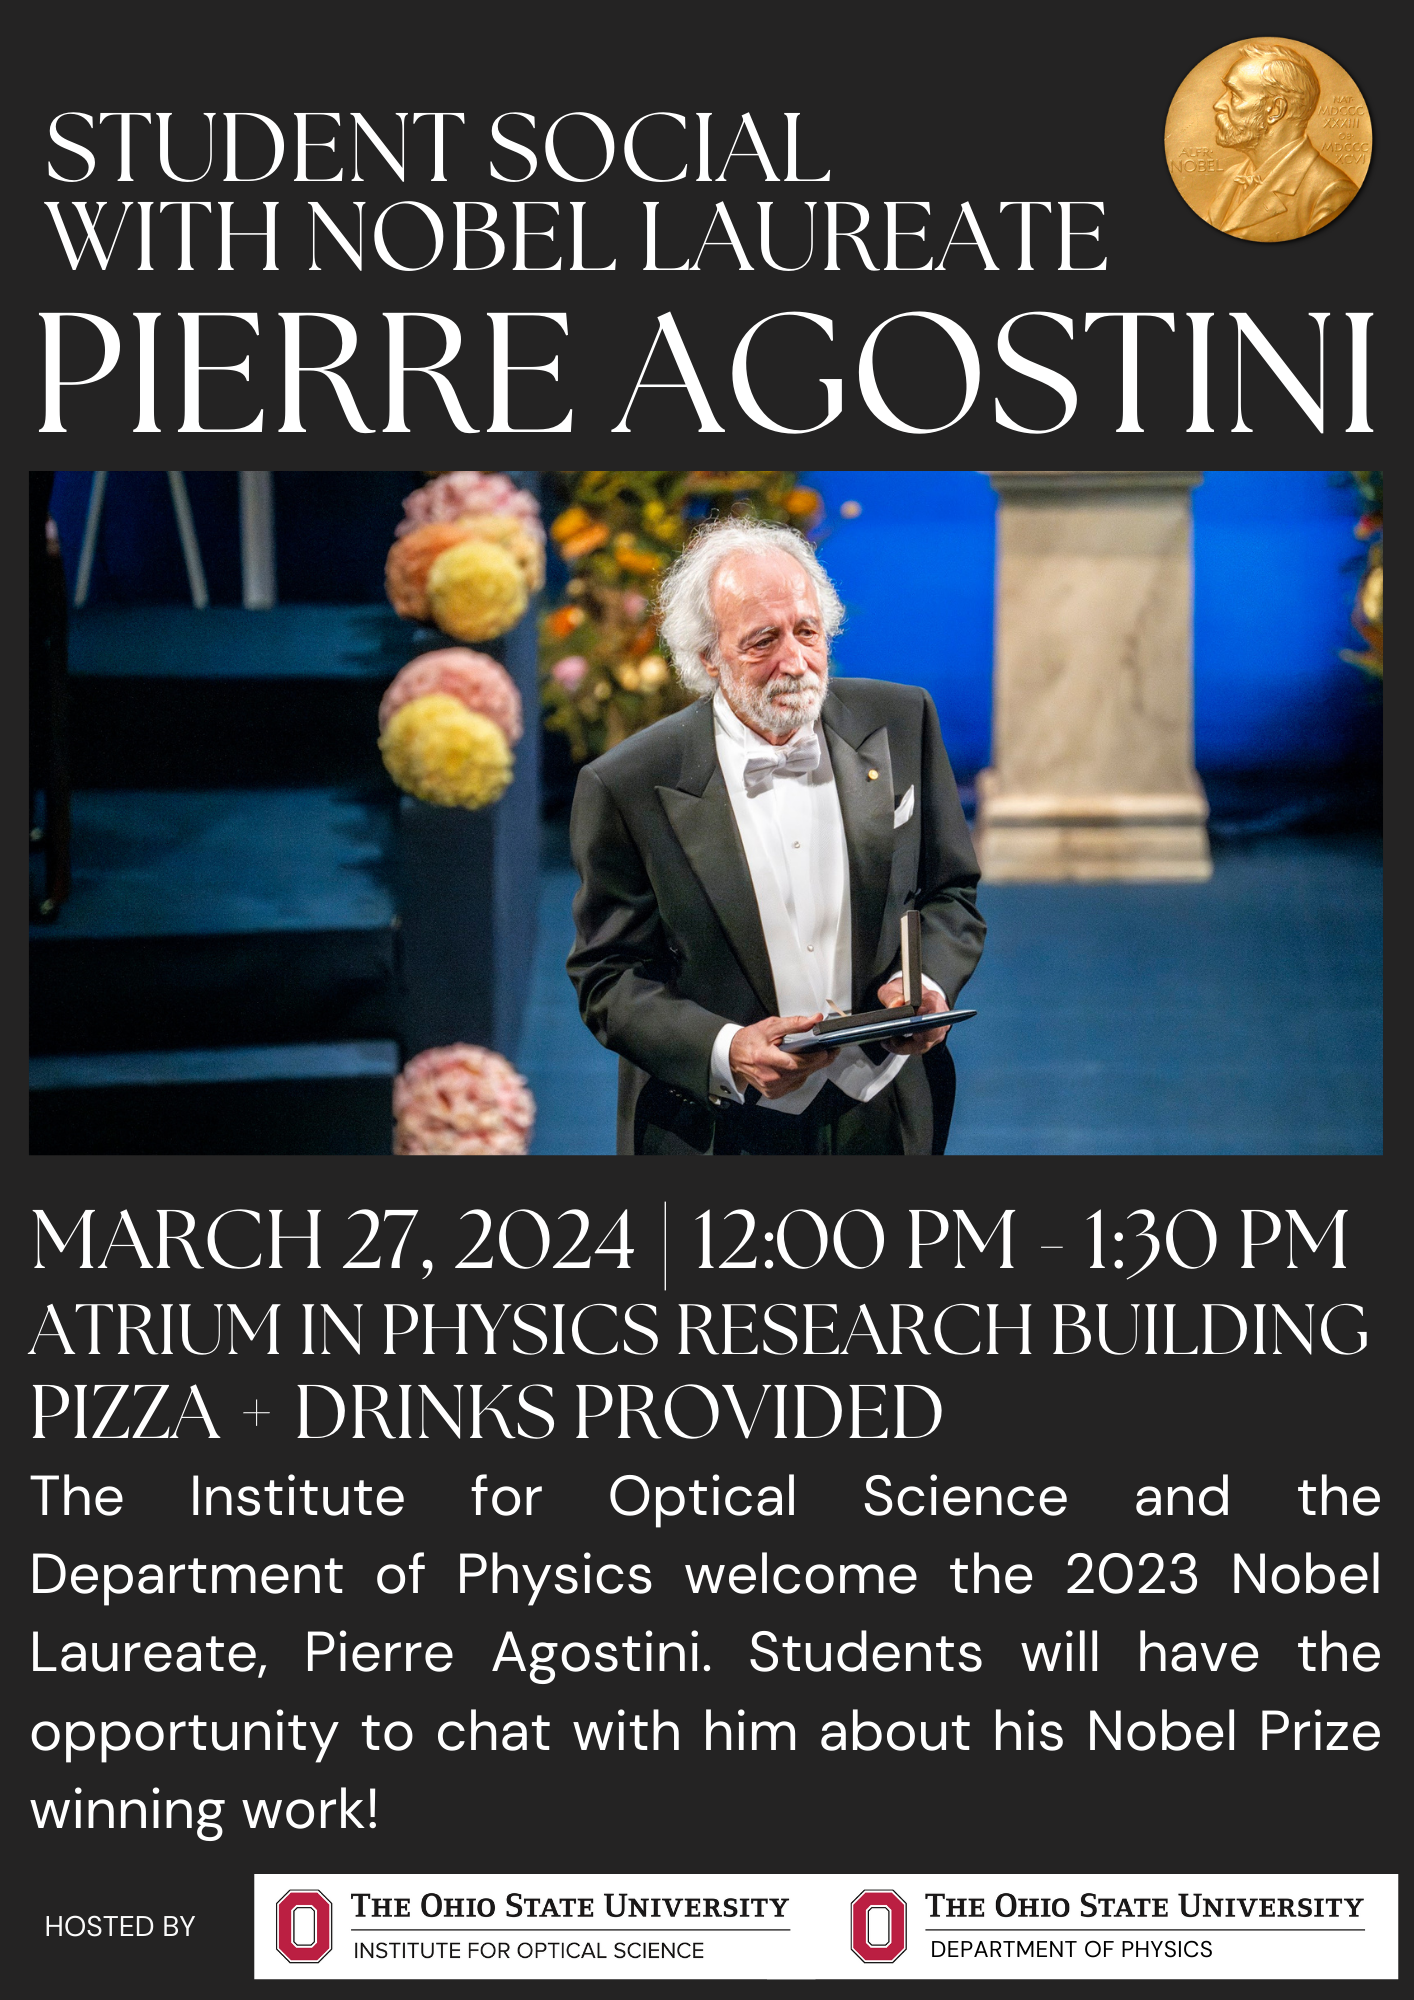 Flyer for Student Social with Pierre Agostini